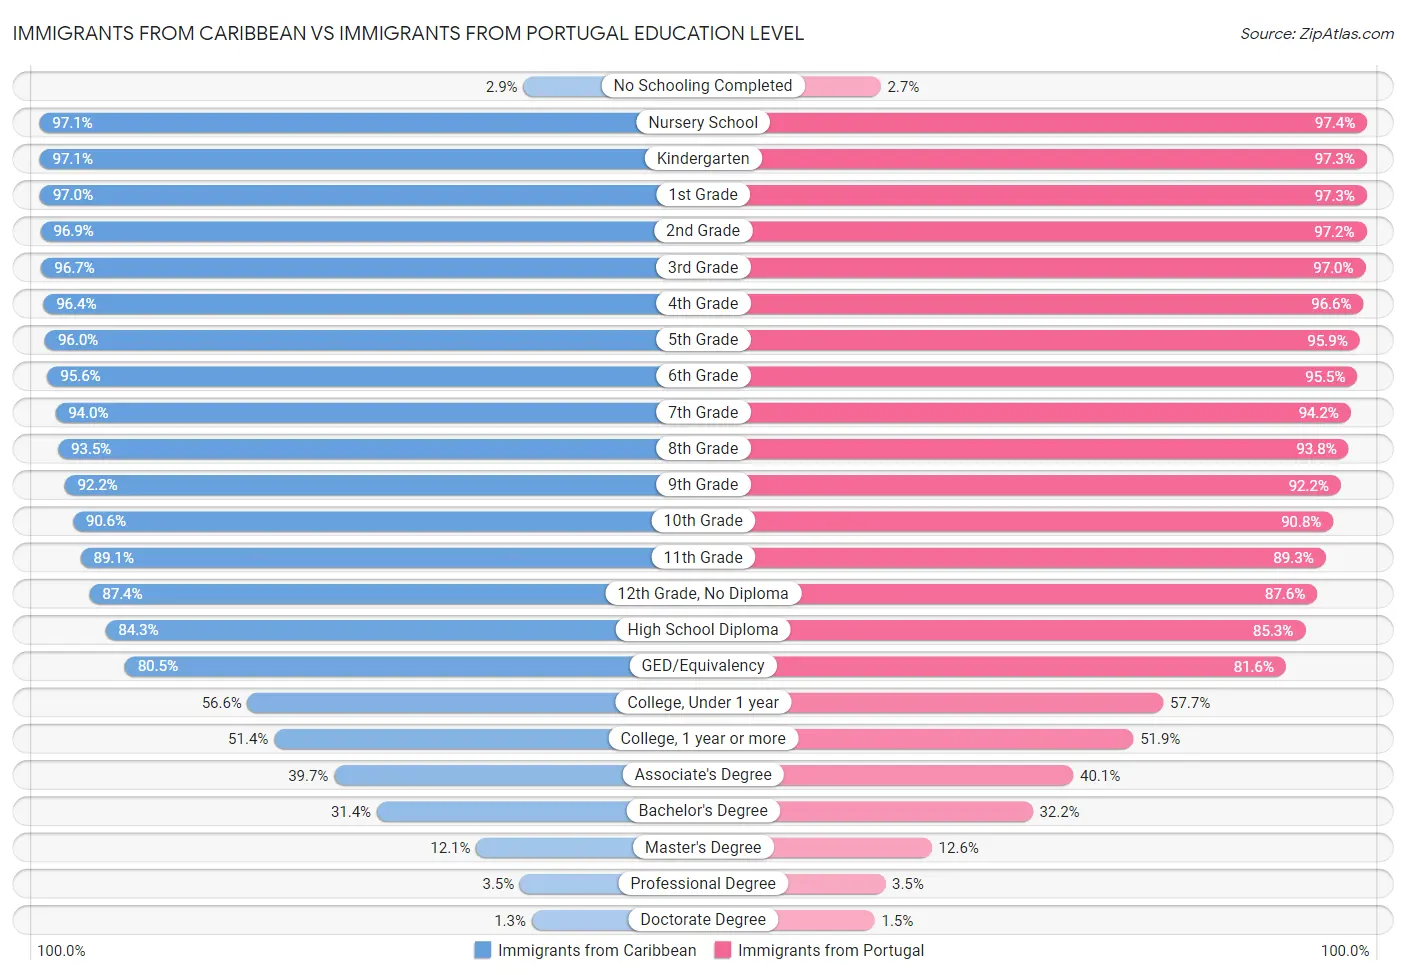 Immigrants from Caribbean vs Immigrants from Portugal Education Level